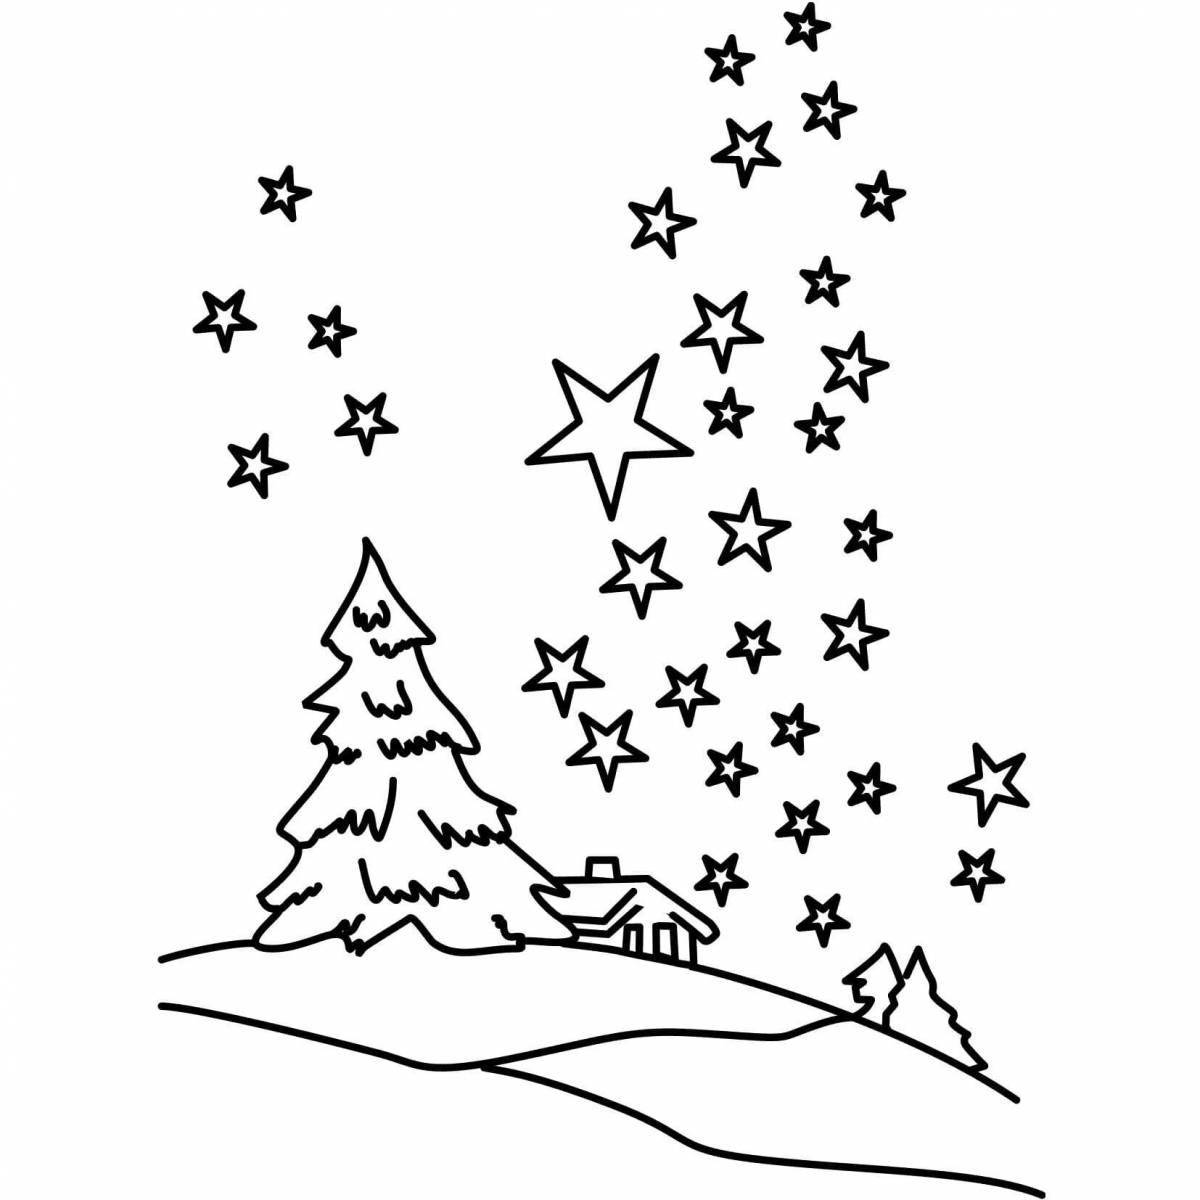 Major starry sky coloring book for kids